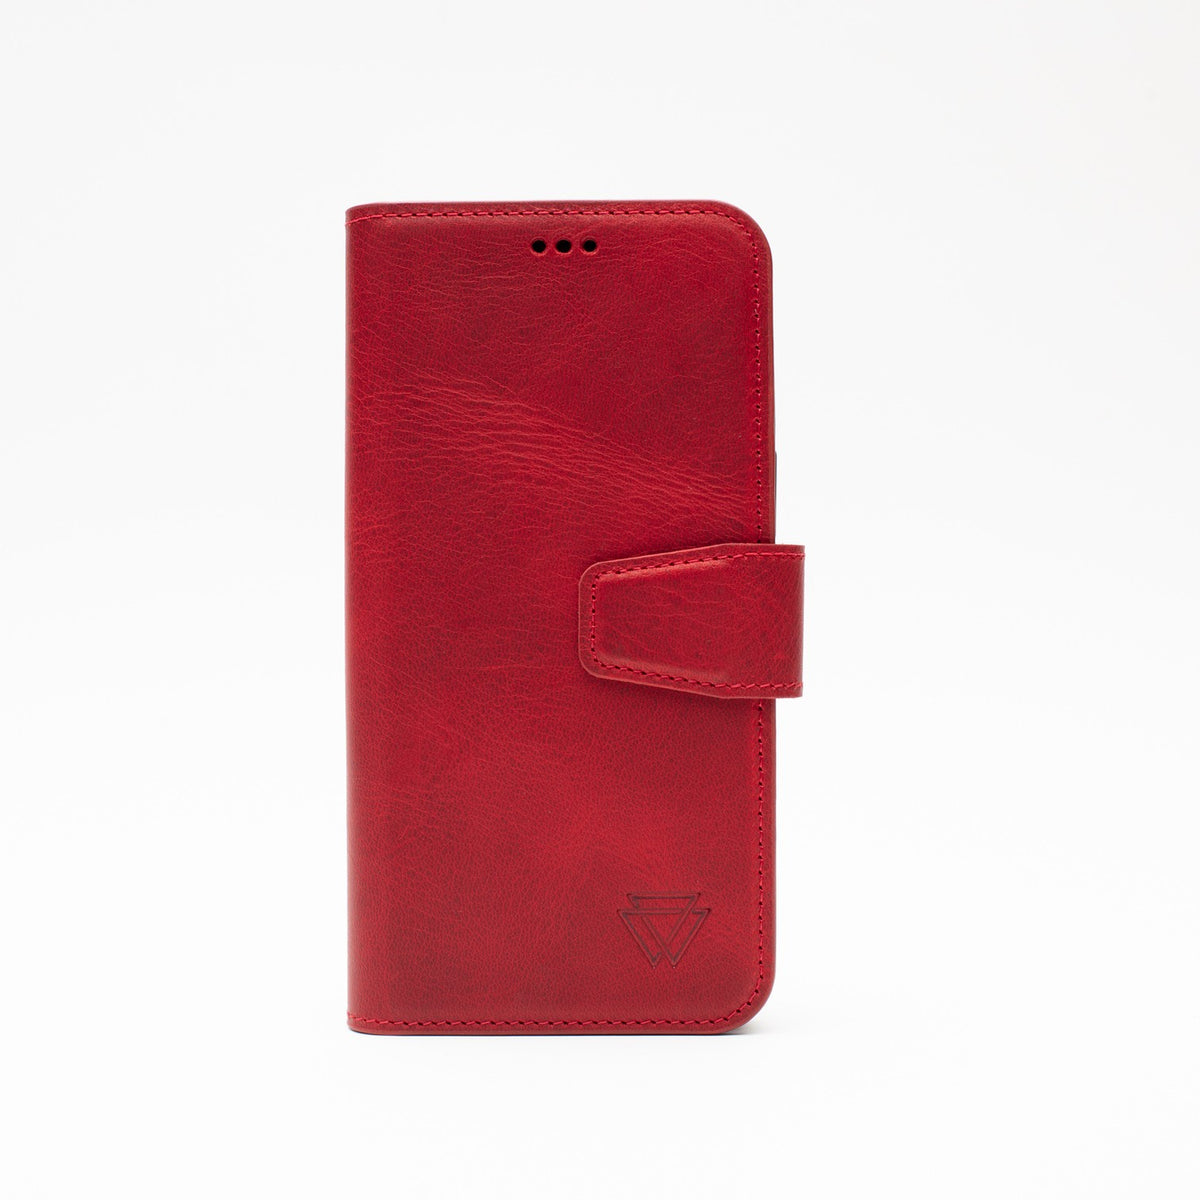 Wachikopa Genuine Leather Magic Book Case 2 in 1 for iPhone XS Max Red